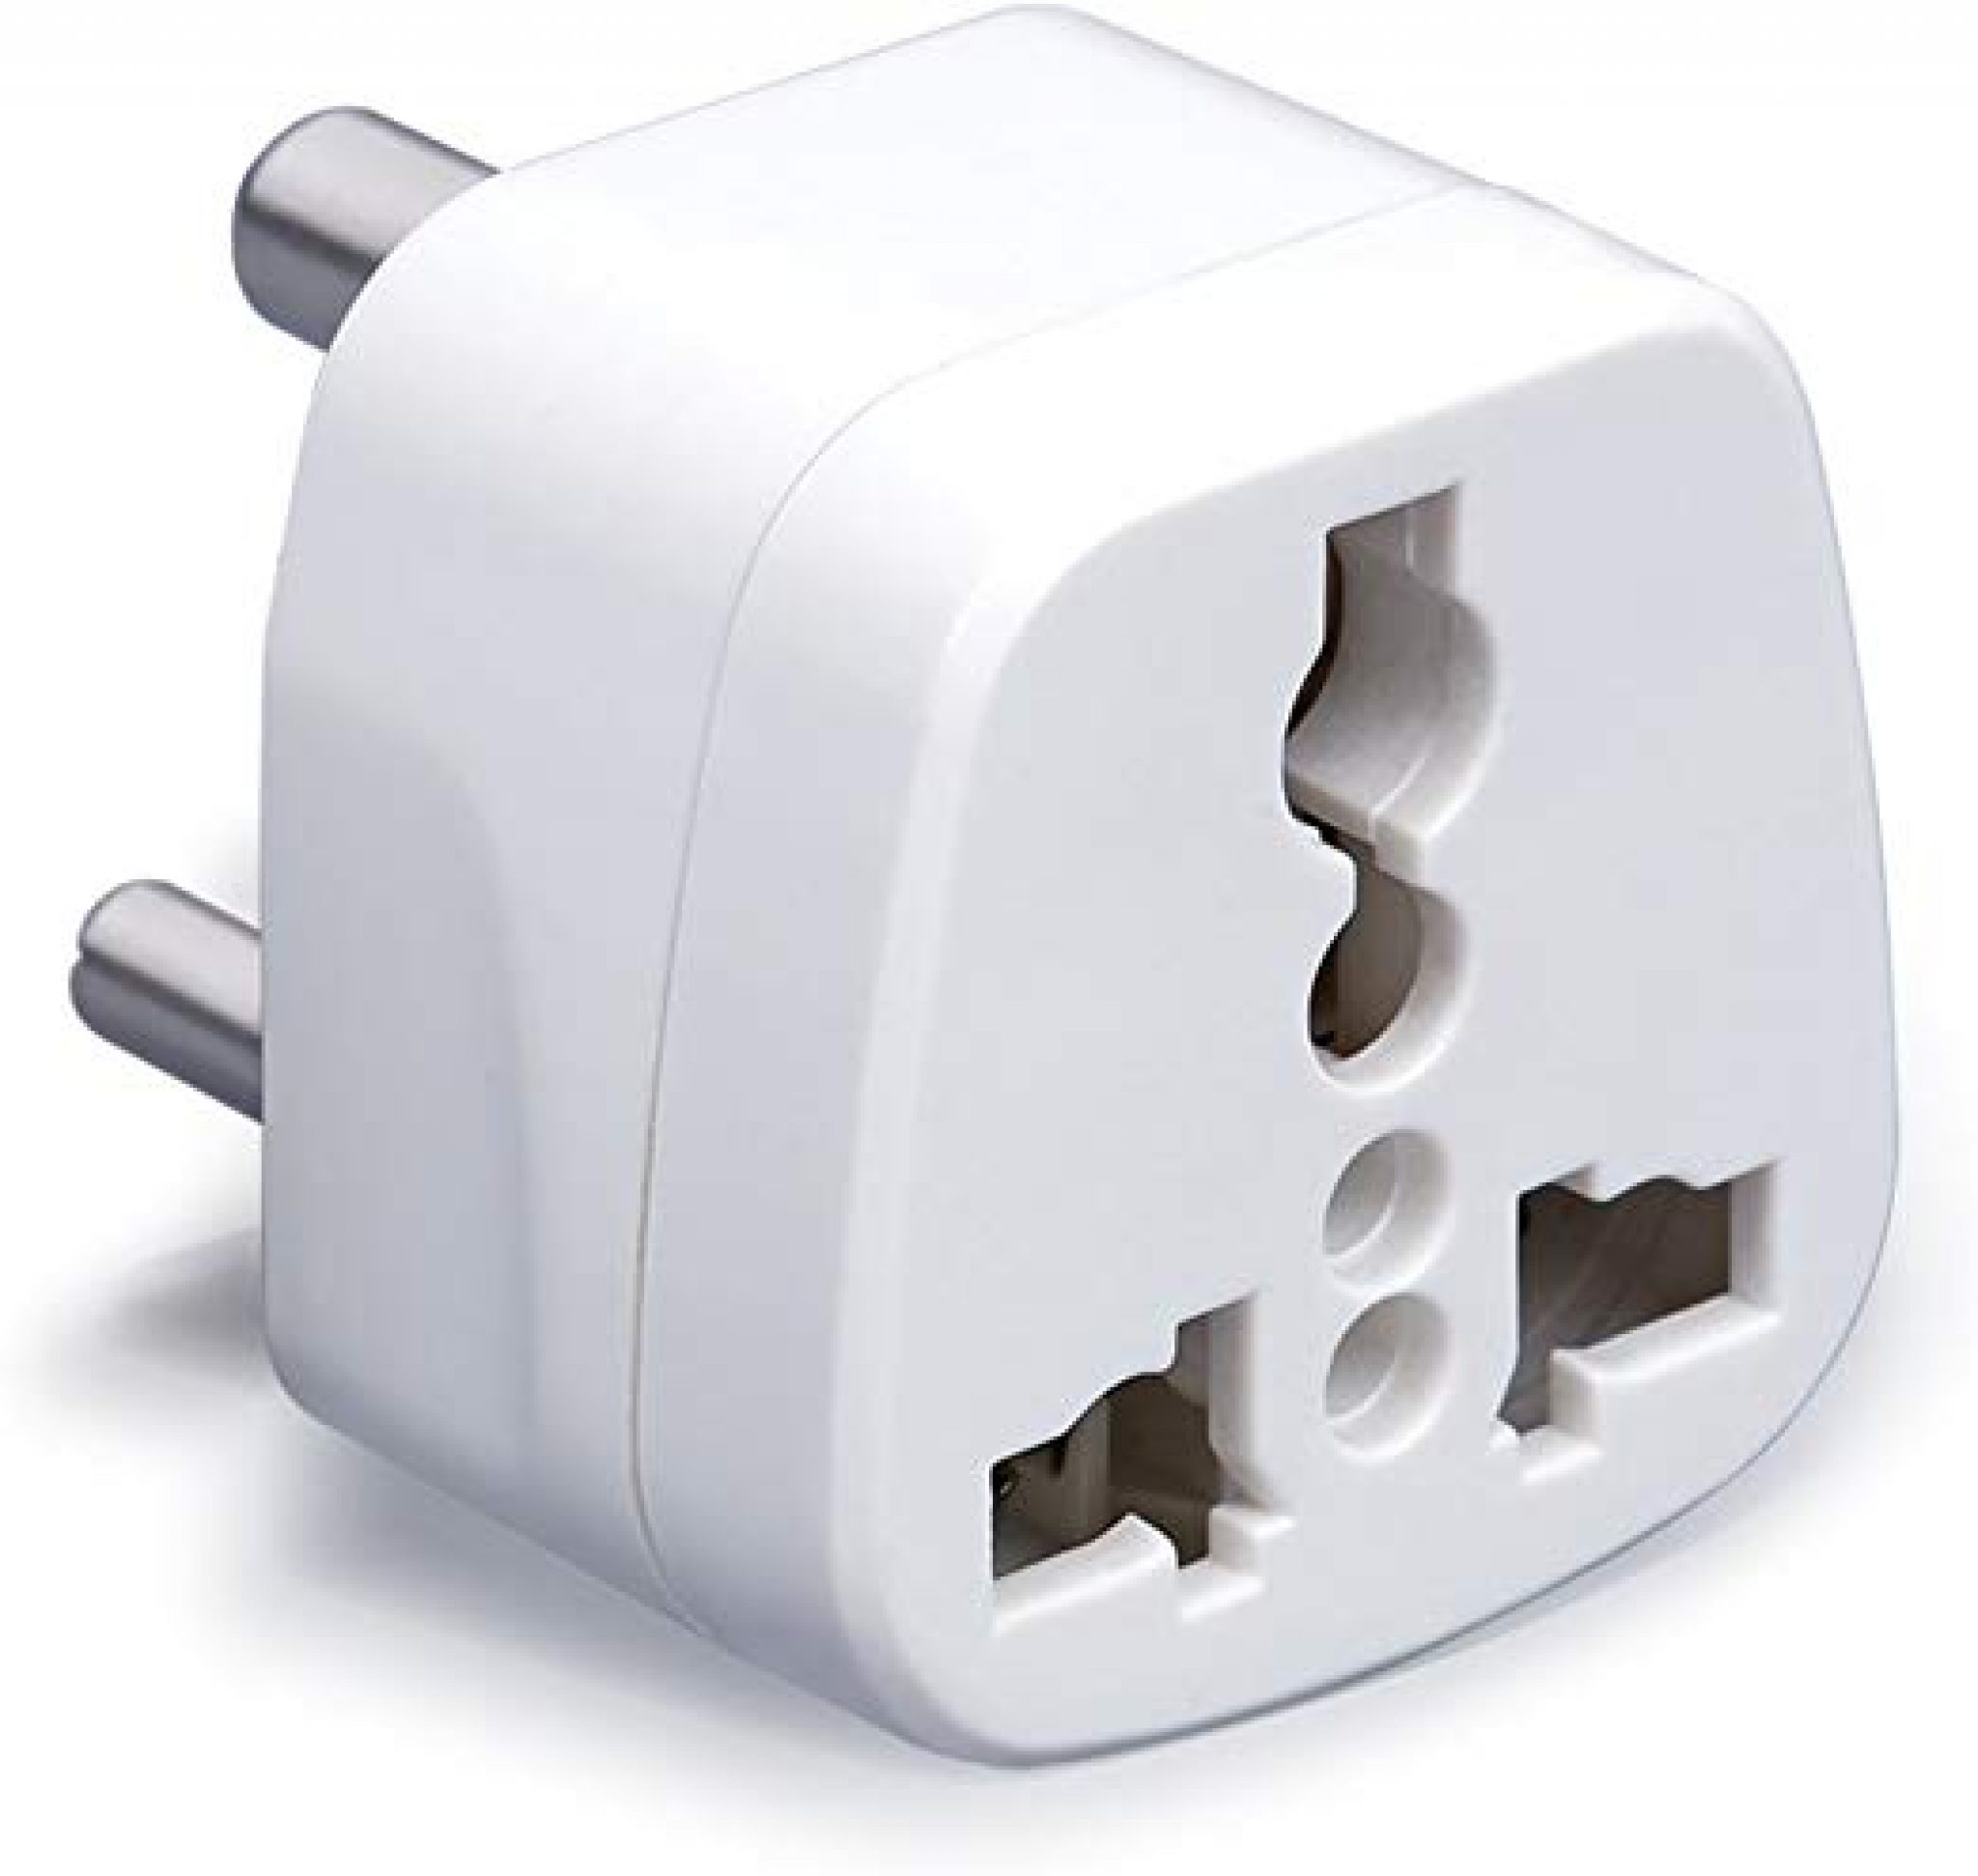 foreign plug adapter